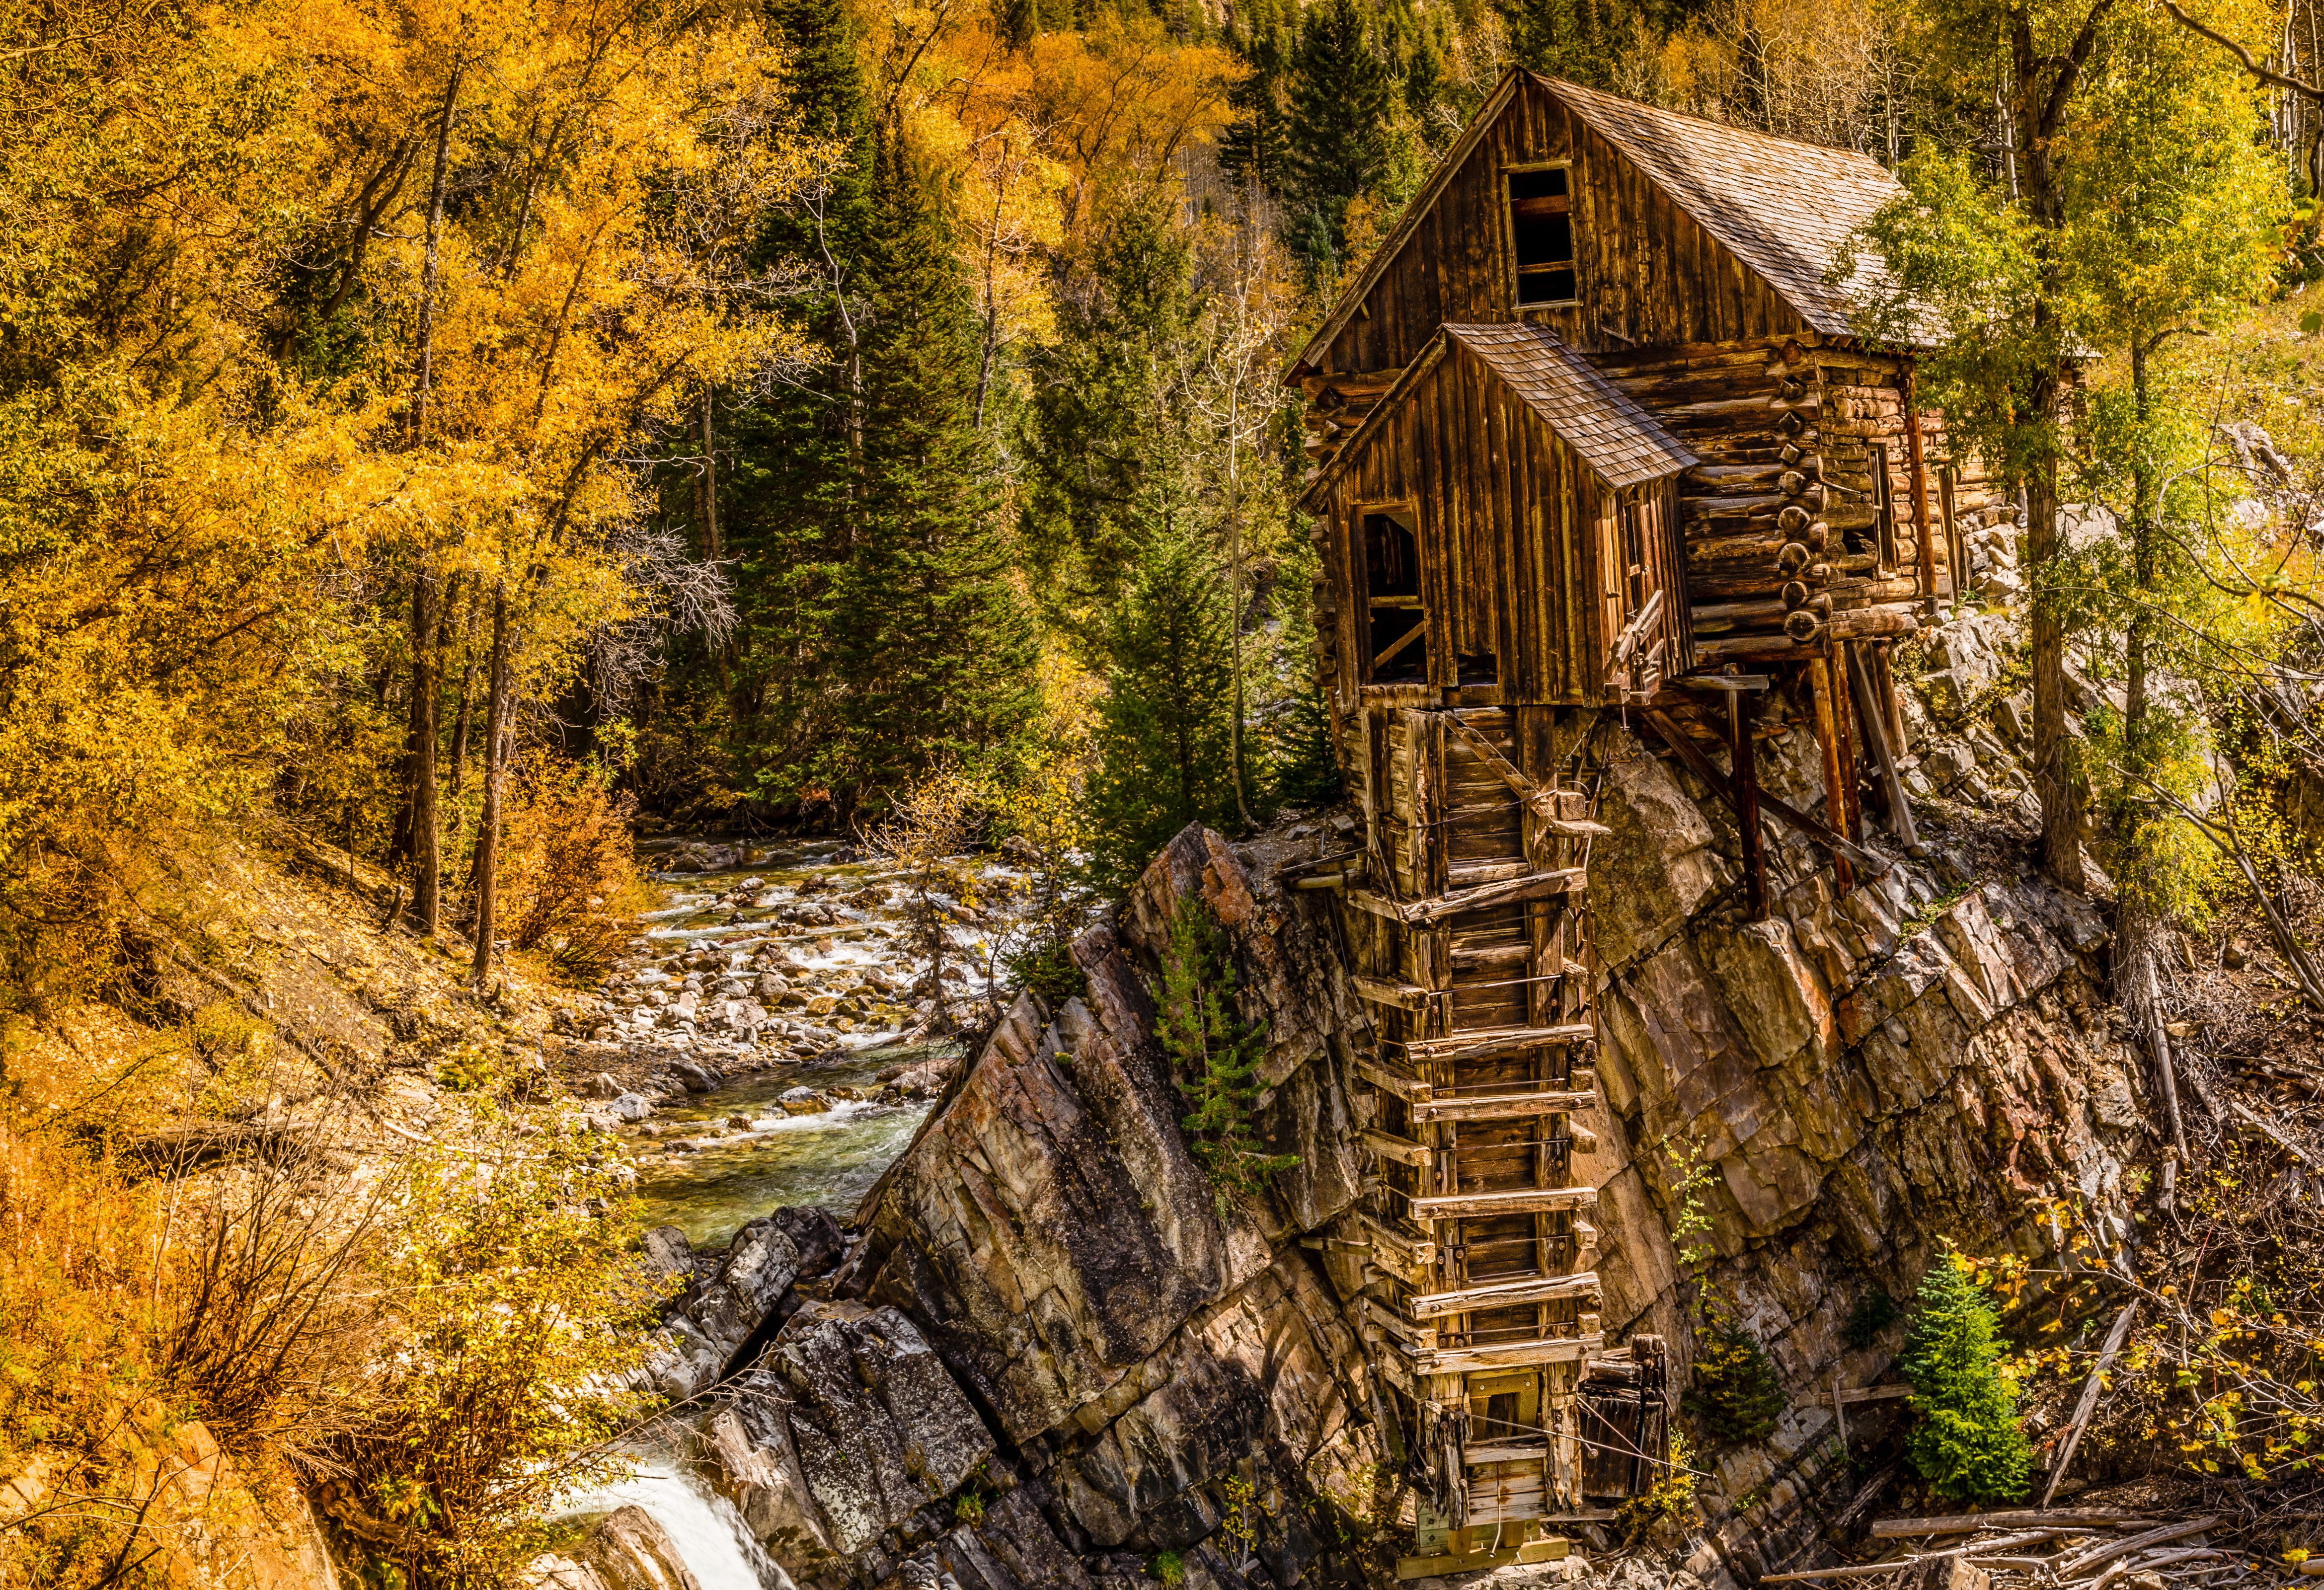 Man Made Crystal Mill HD Wallpaper | Background Image